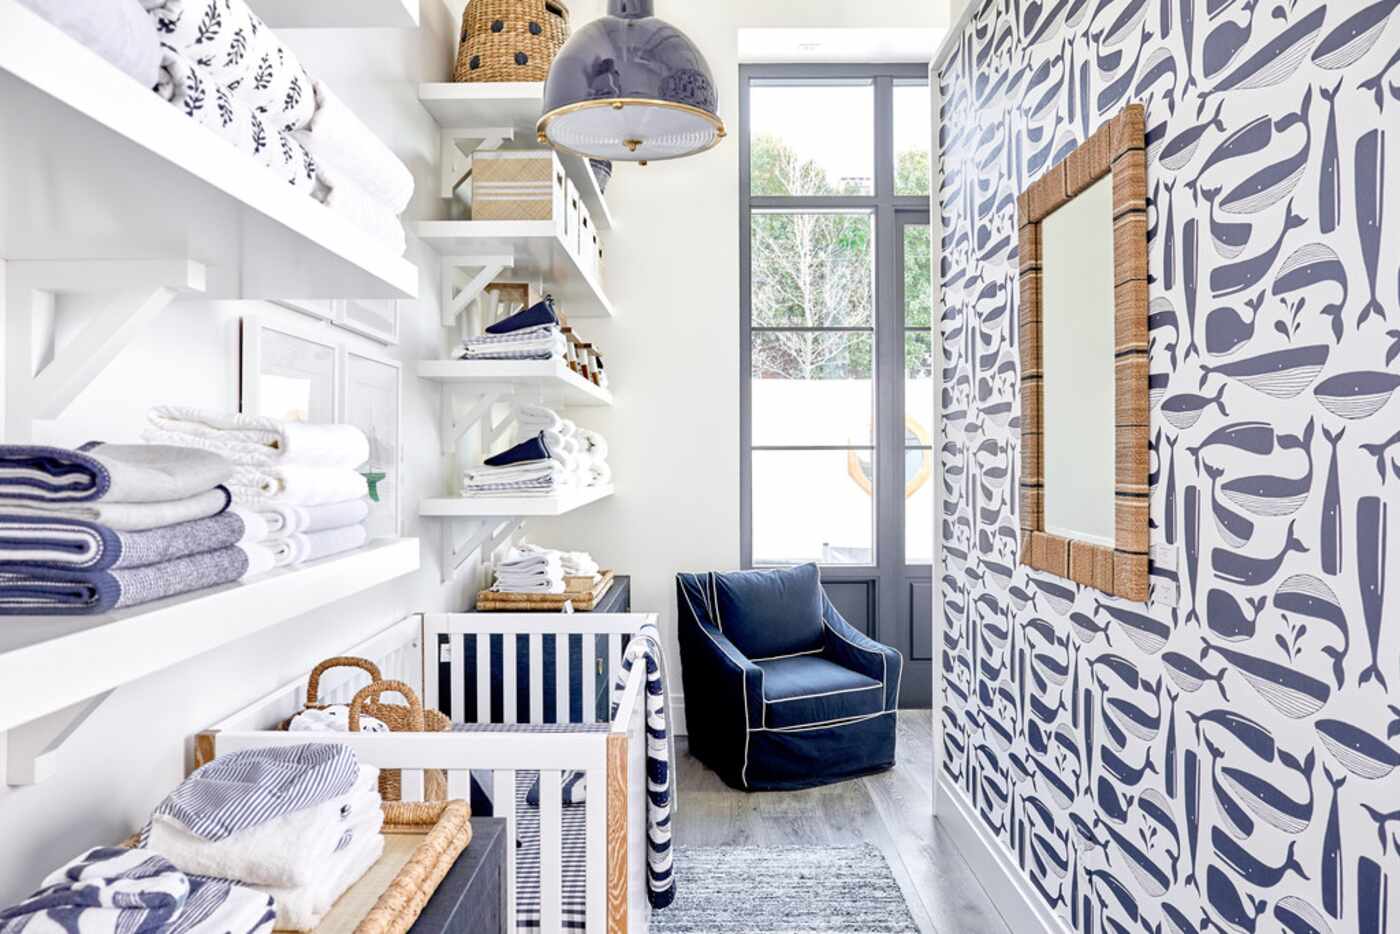 Beyond inspiration and products, the new Serena & Lily store in Knox-Henderson offers design...